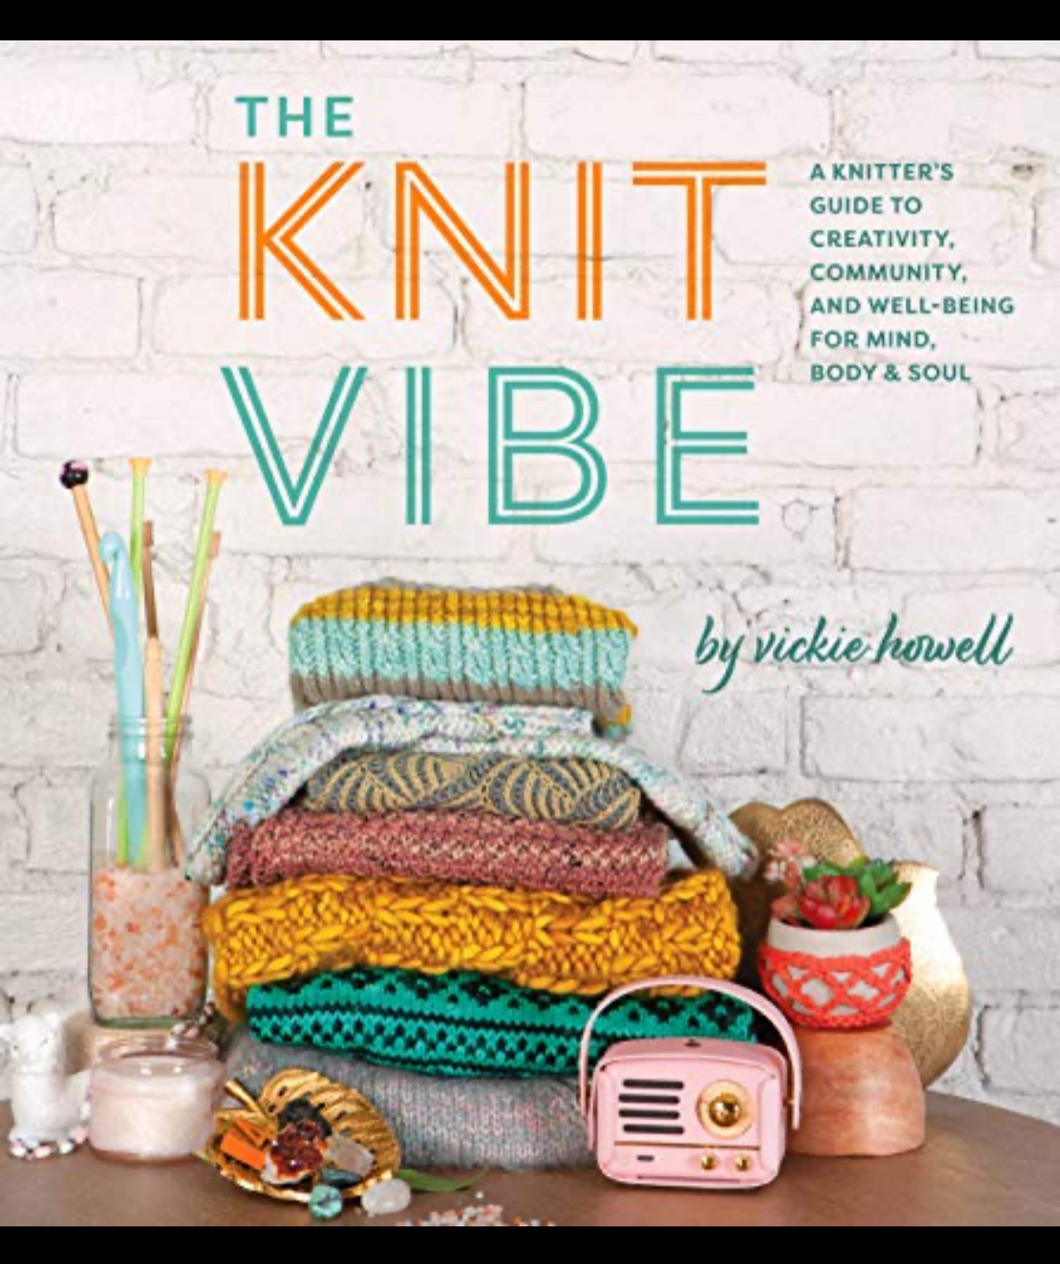 The Knit Vibe Book